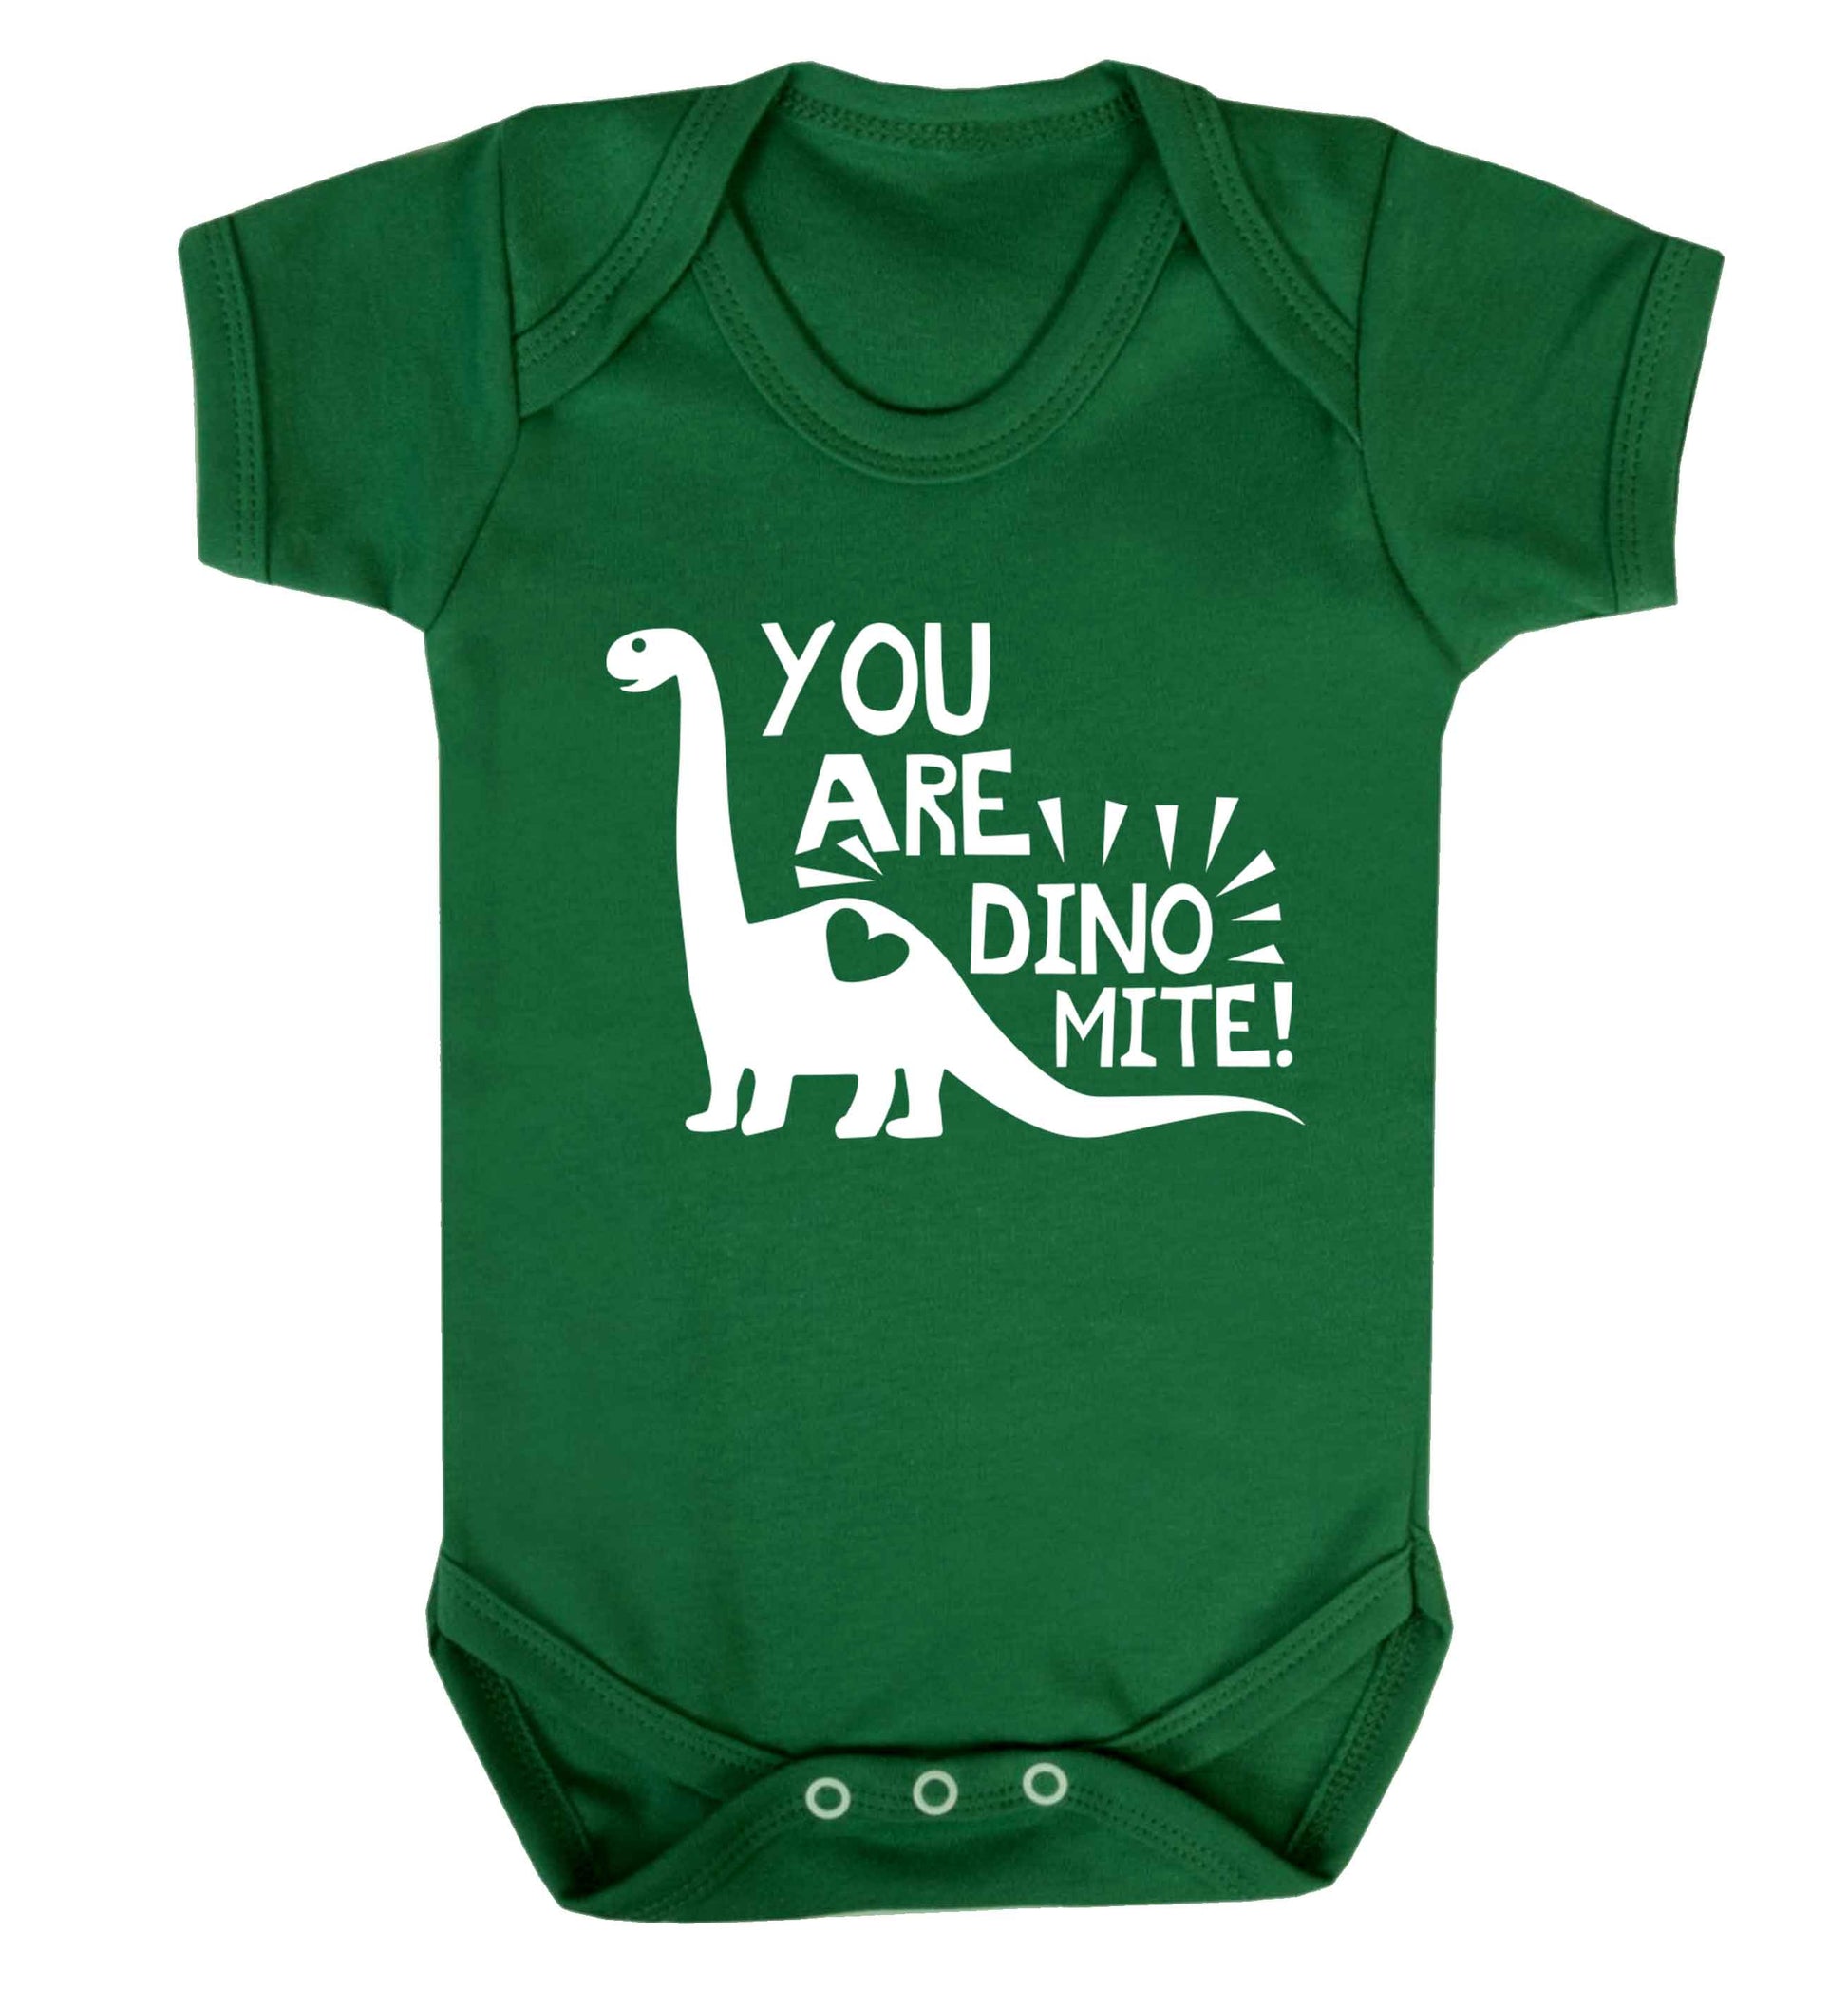 You are dinomite! Baby Vest green 18-24 months